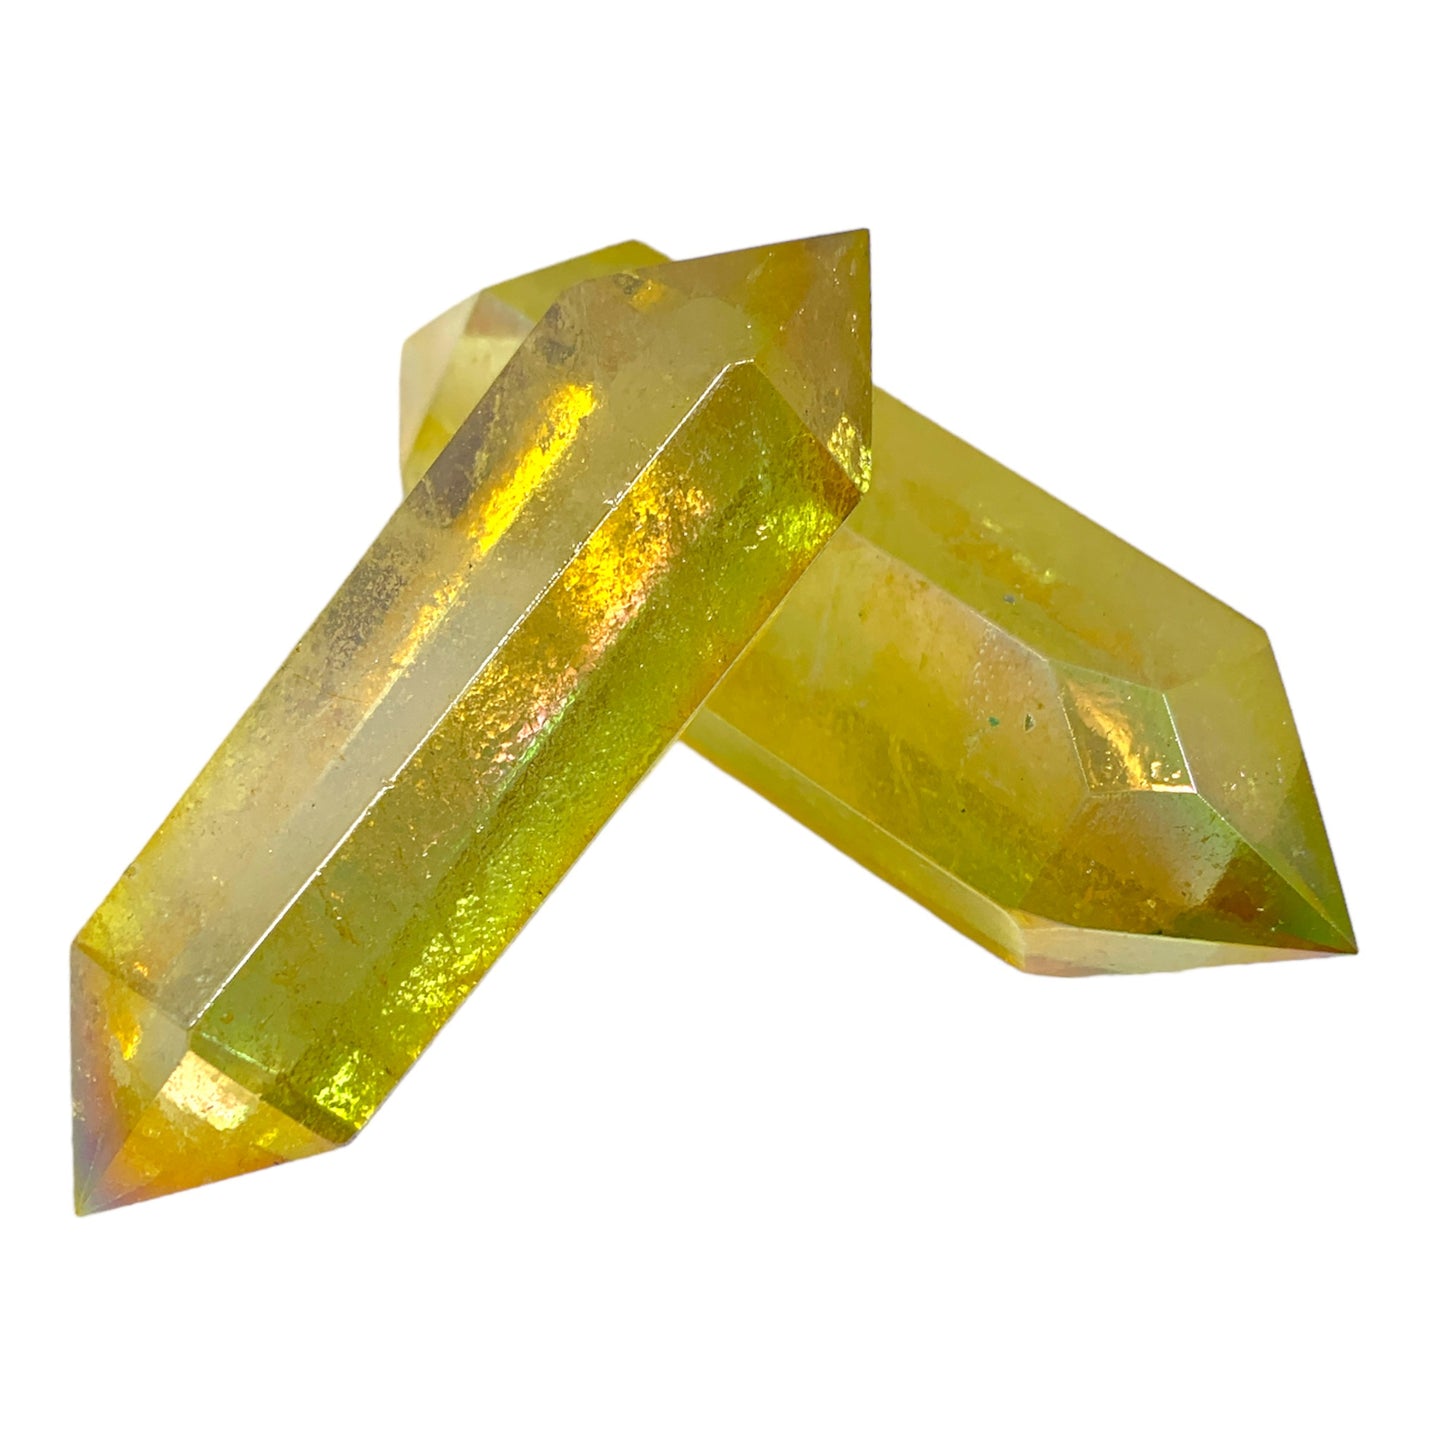 Clear Quartz Aura Yellow - 3-4 inch - Price per gram - NEW423 - Double Terminated Polished Points